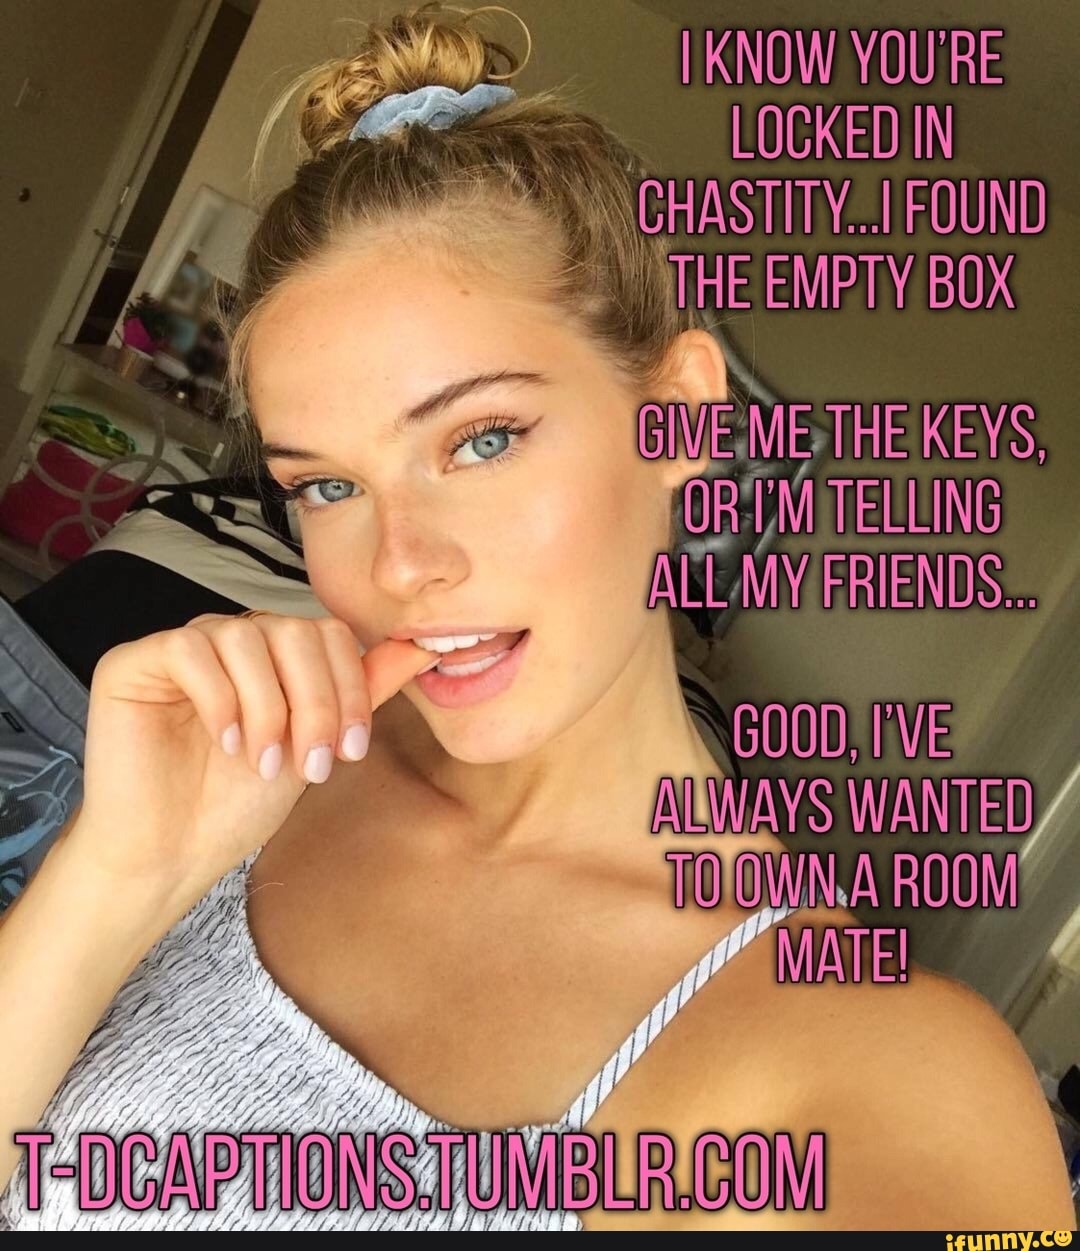 Friends Chastity Key Captions Roommate